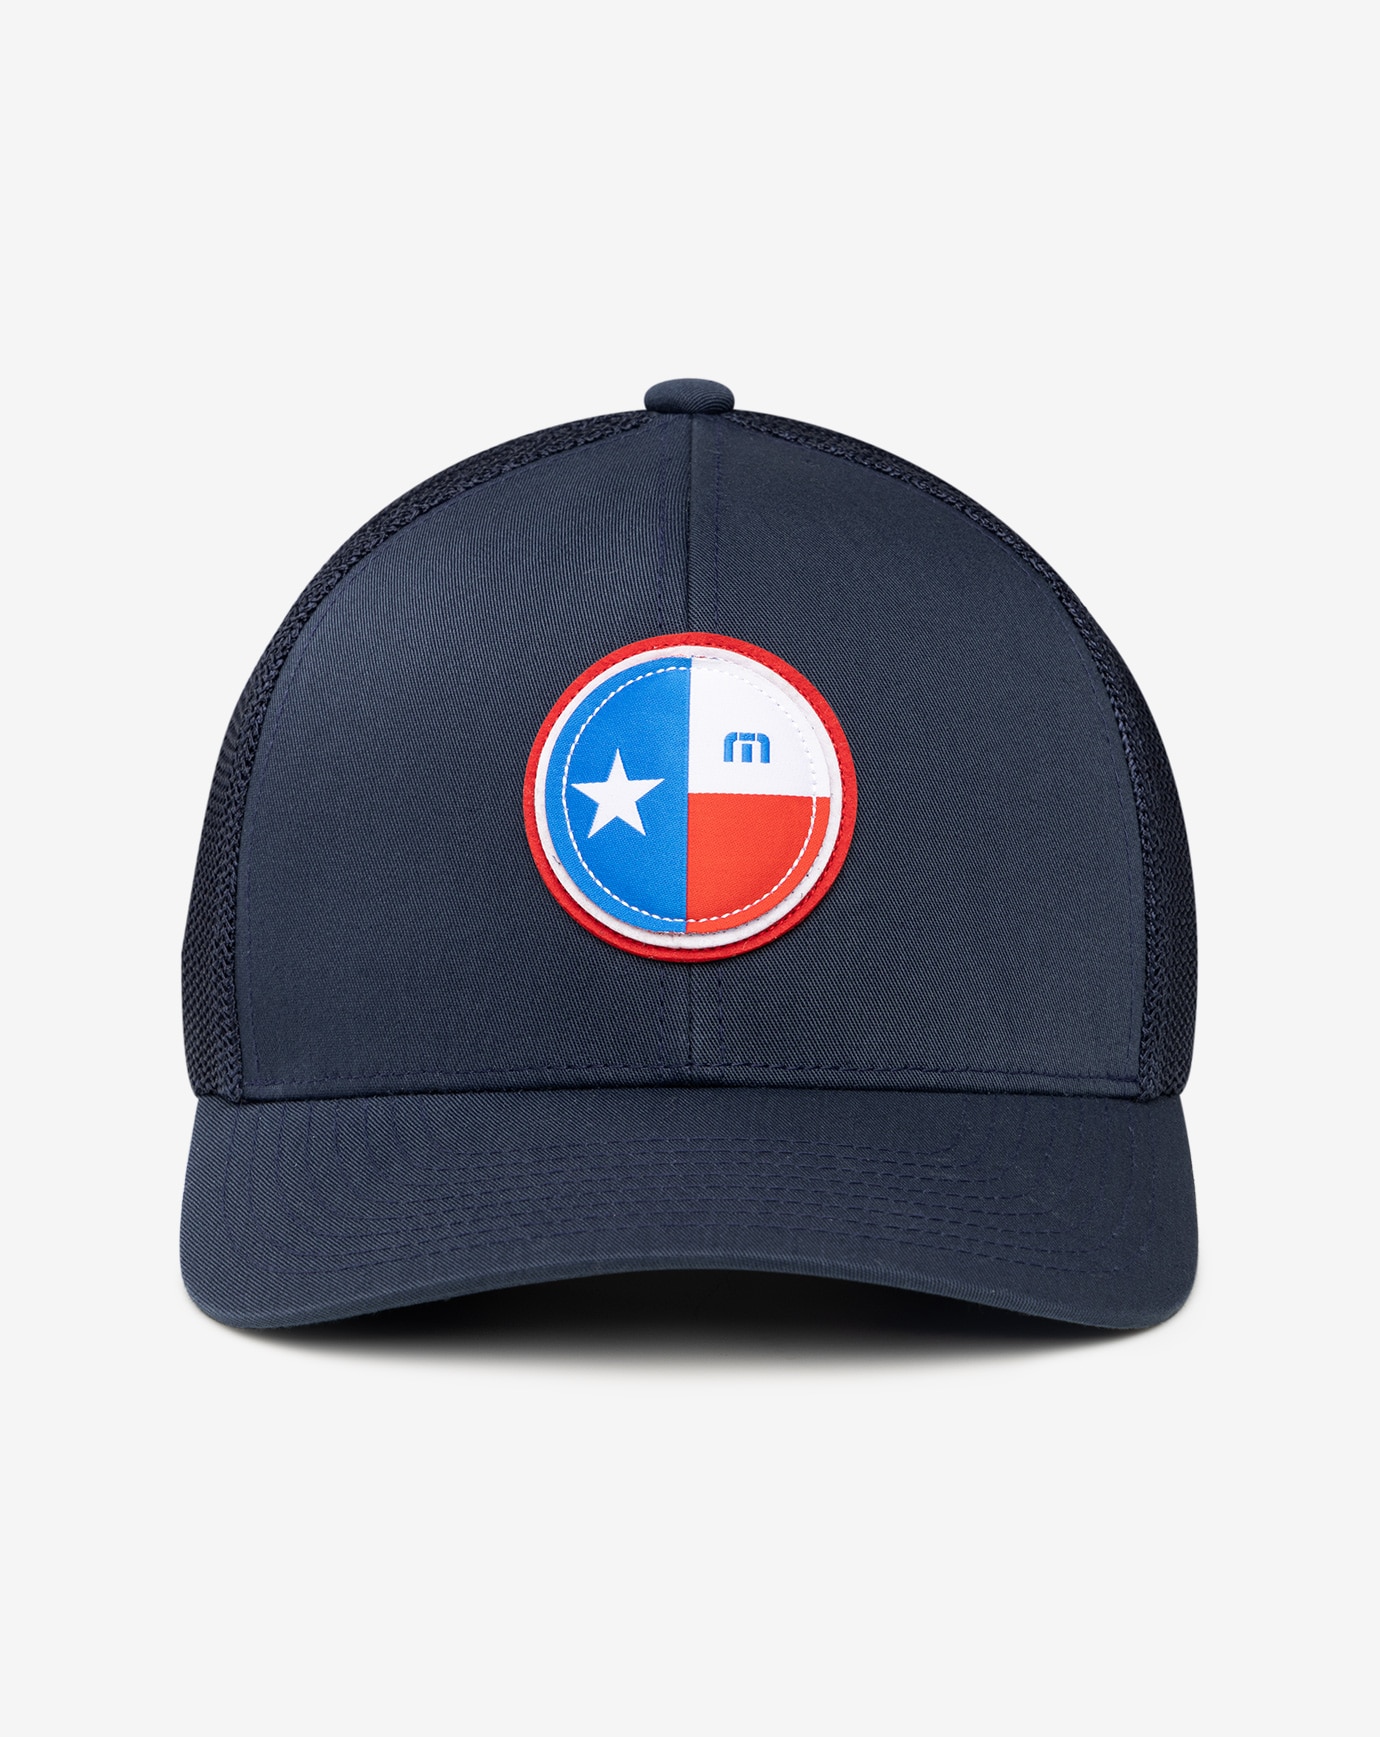 Related Product - RIVER WALK SNAPBACK HAT